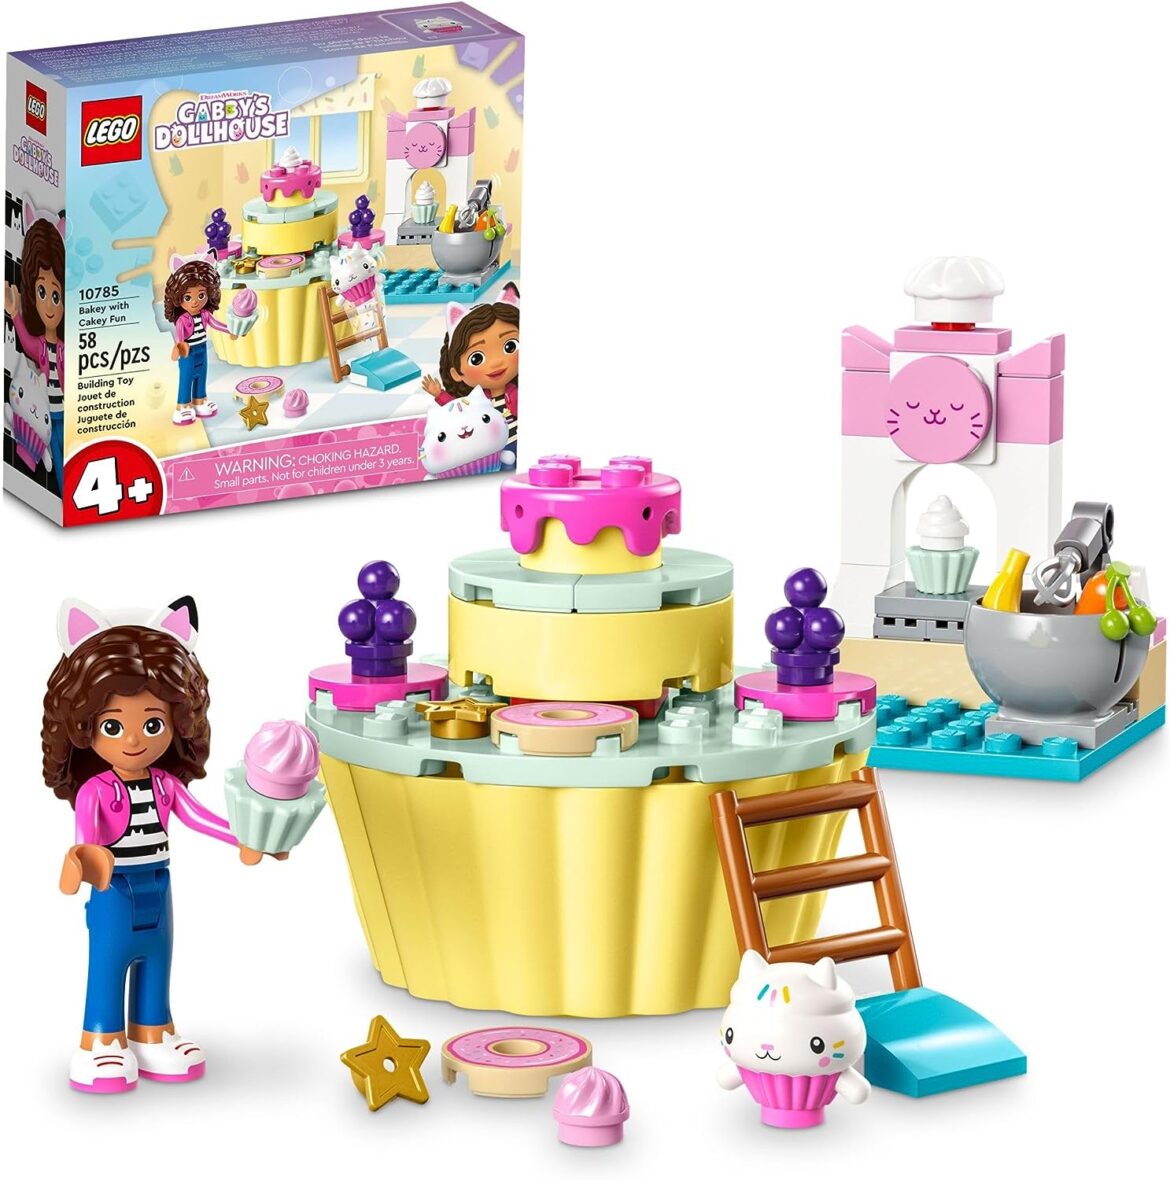 LEGO Gabby’s Dollhouse Bakey with Cakey Fun 10785 Building Toy Set for Fans of The DreamWorks Animation Series, Pretend Play Kitchen, Oven and Giant Cupcake to Decorate, Gift for 4+ Year Olds